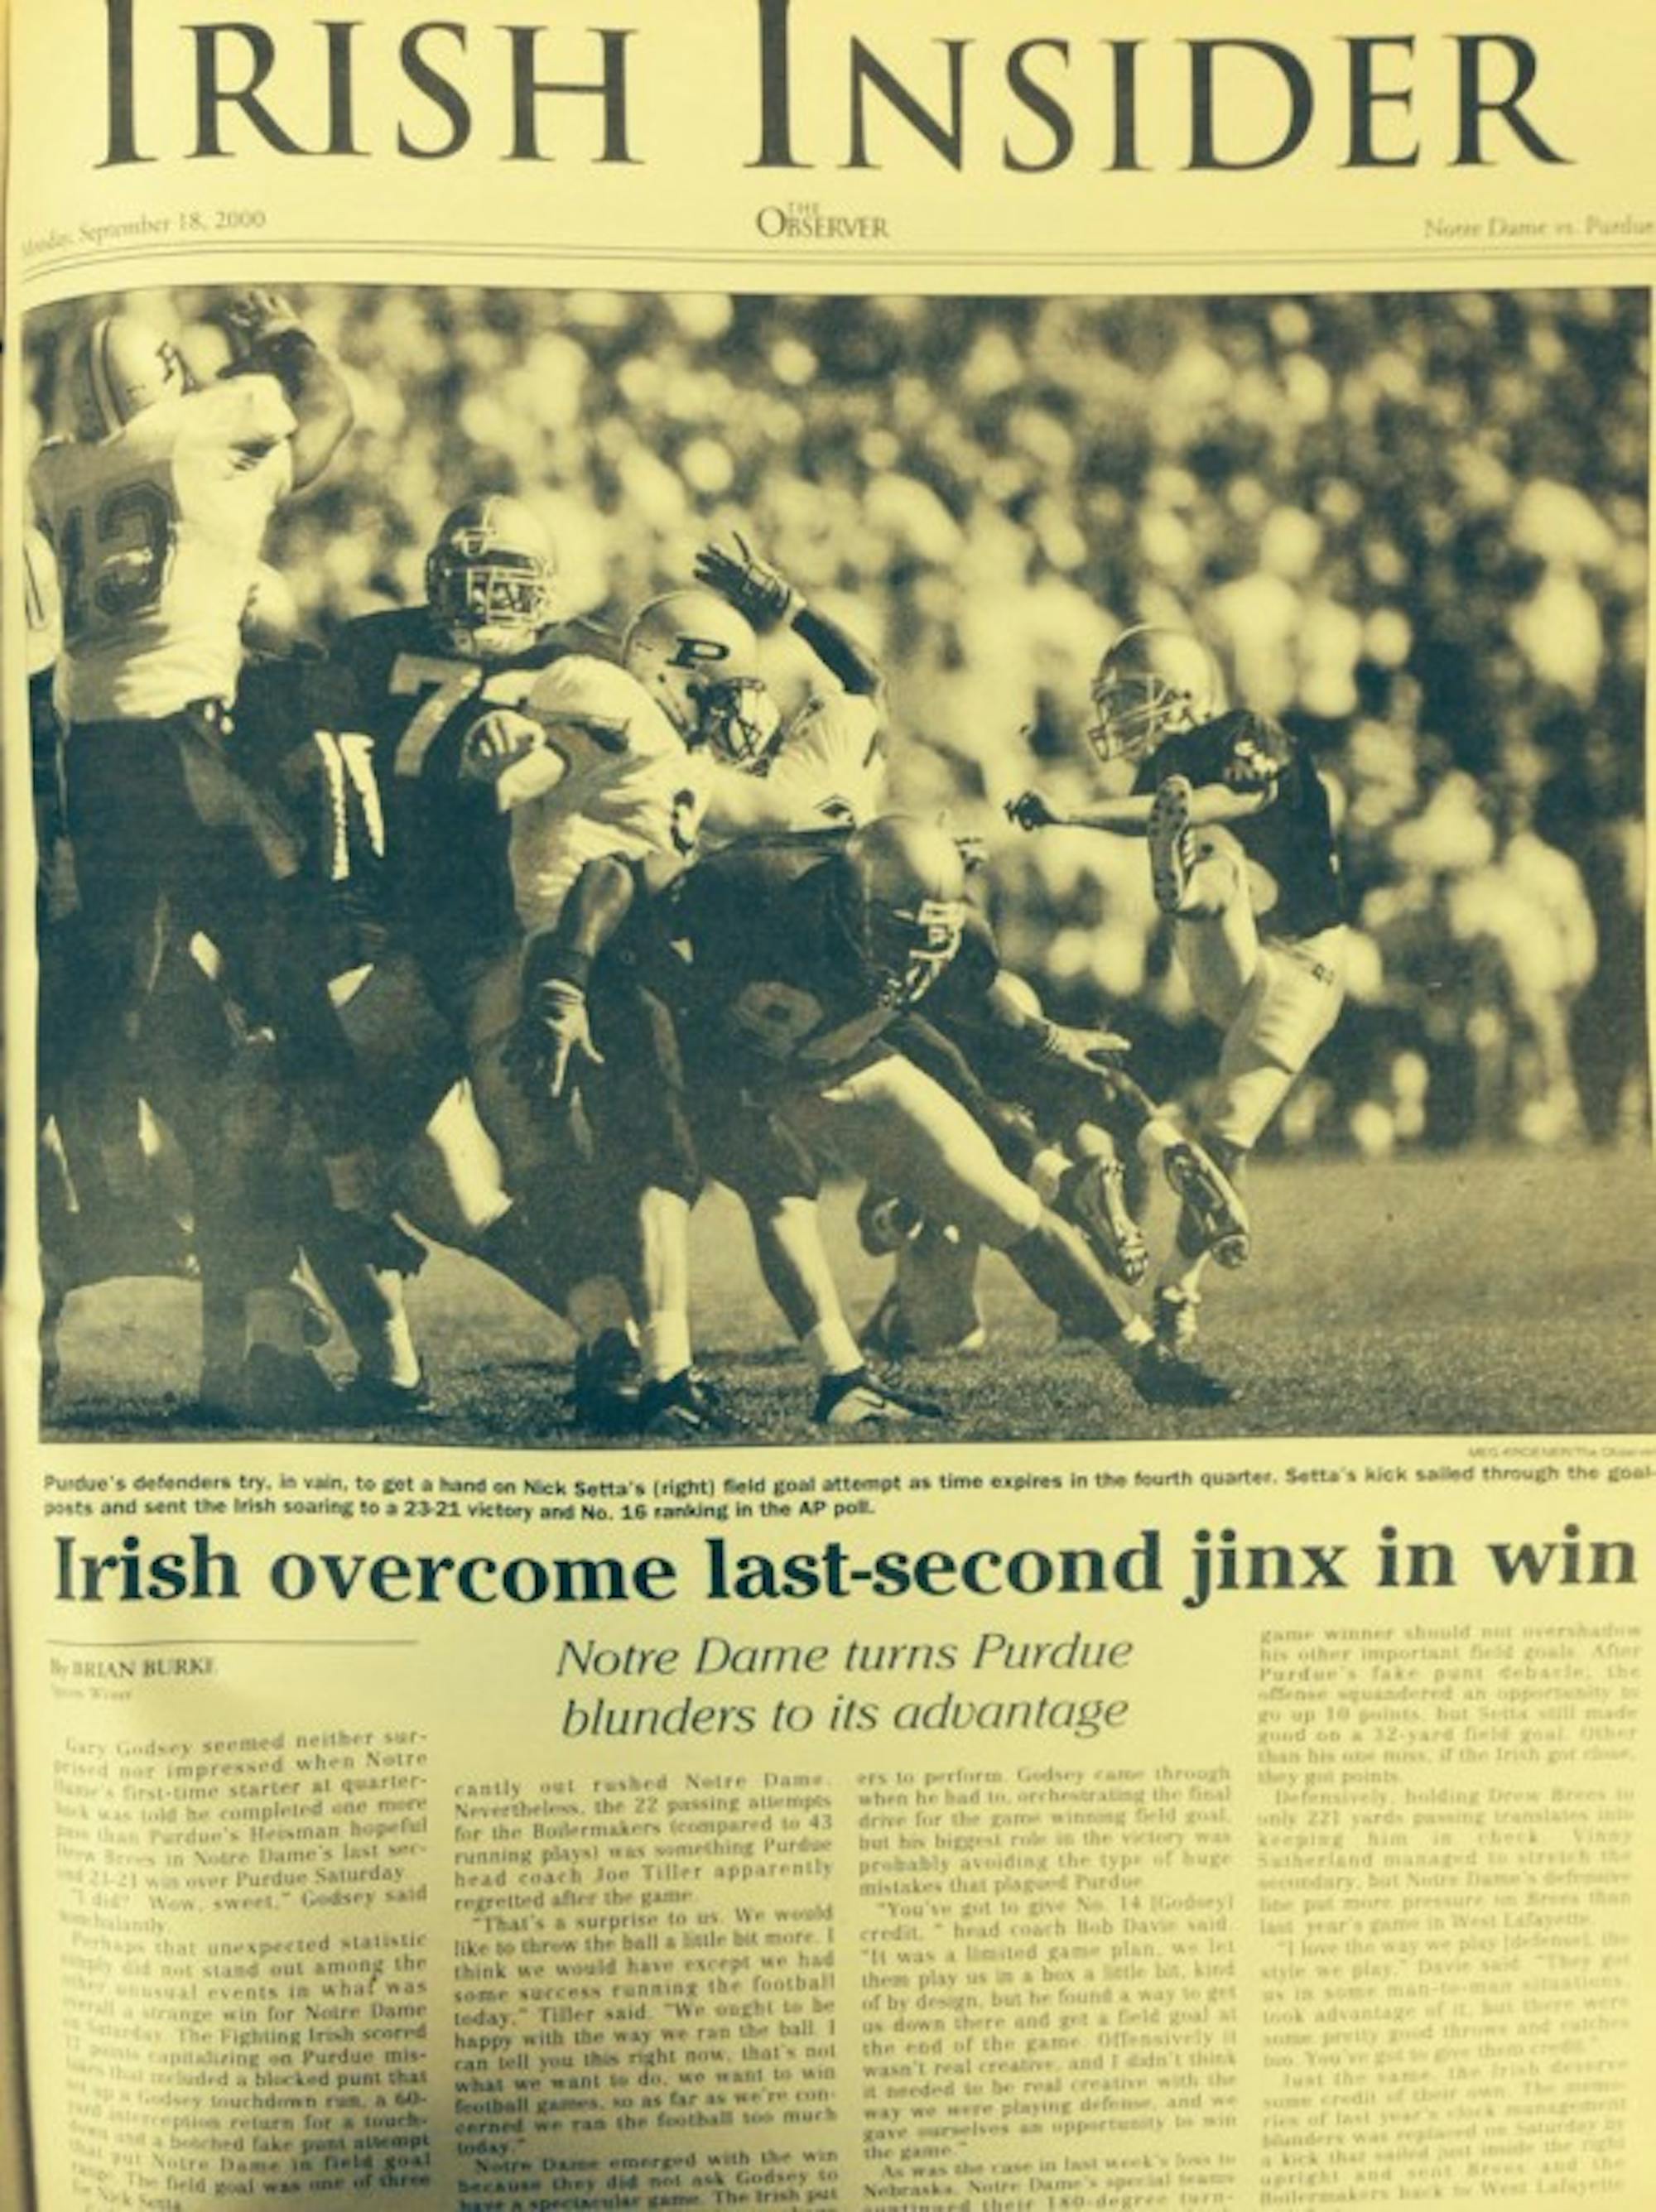 The Observer from Sept. 18, 2000.